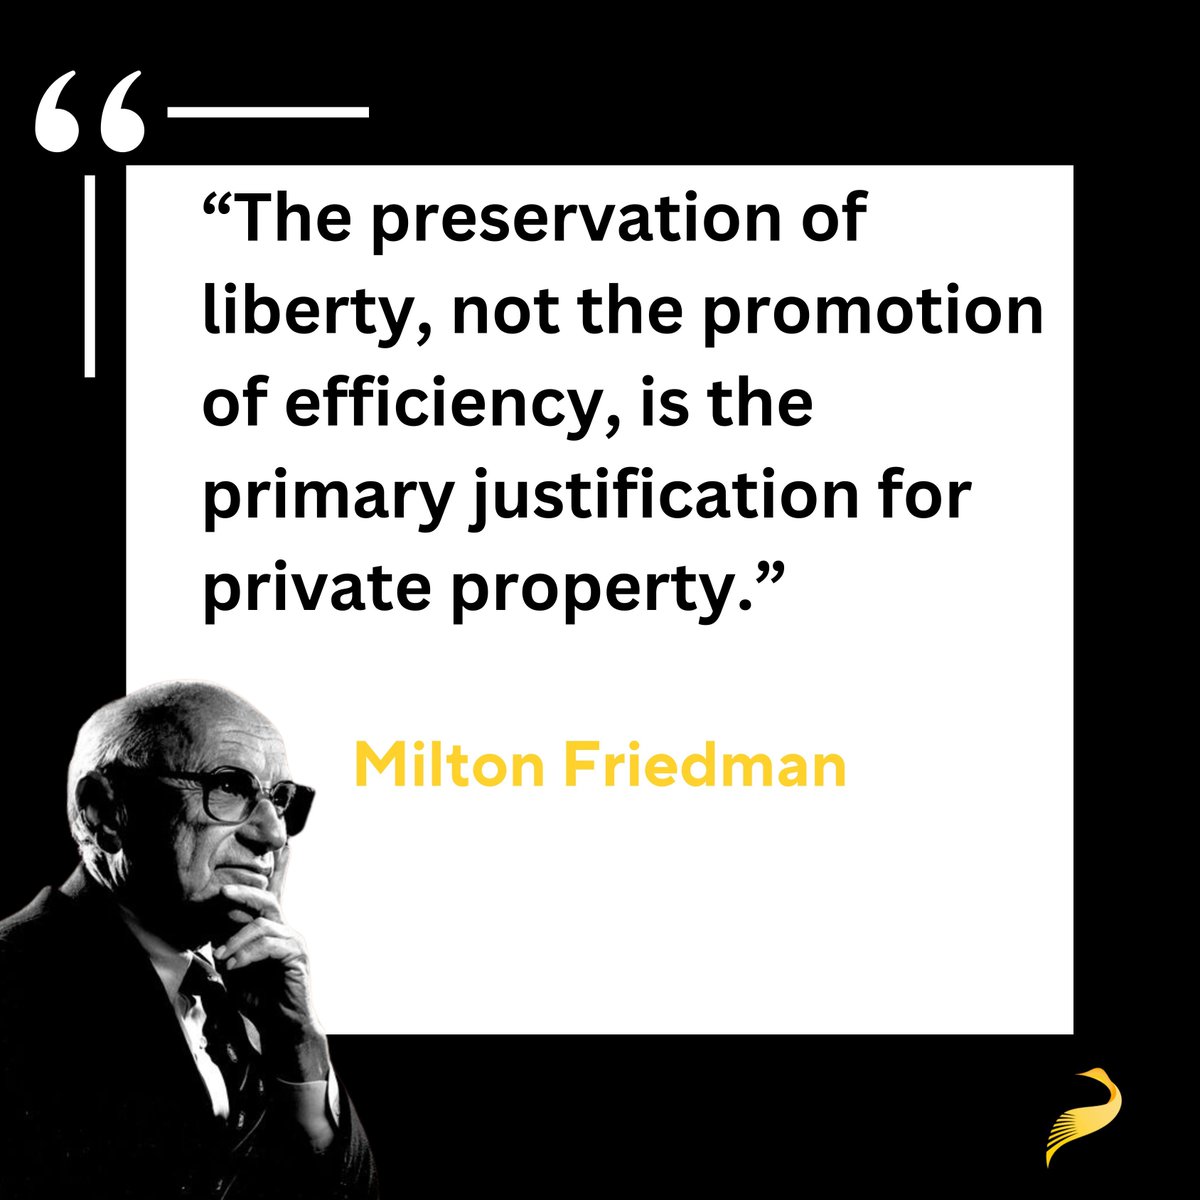 A stalwart advocate for free markets, Friedman's seminal contributions to economic thought emphasized individual liberty and limited government intervention.